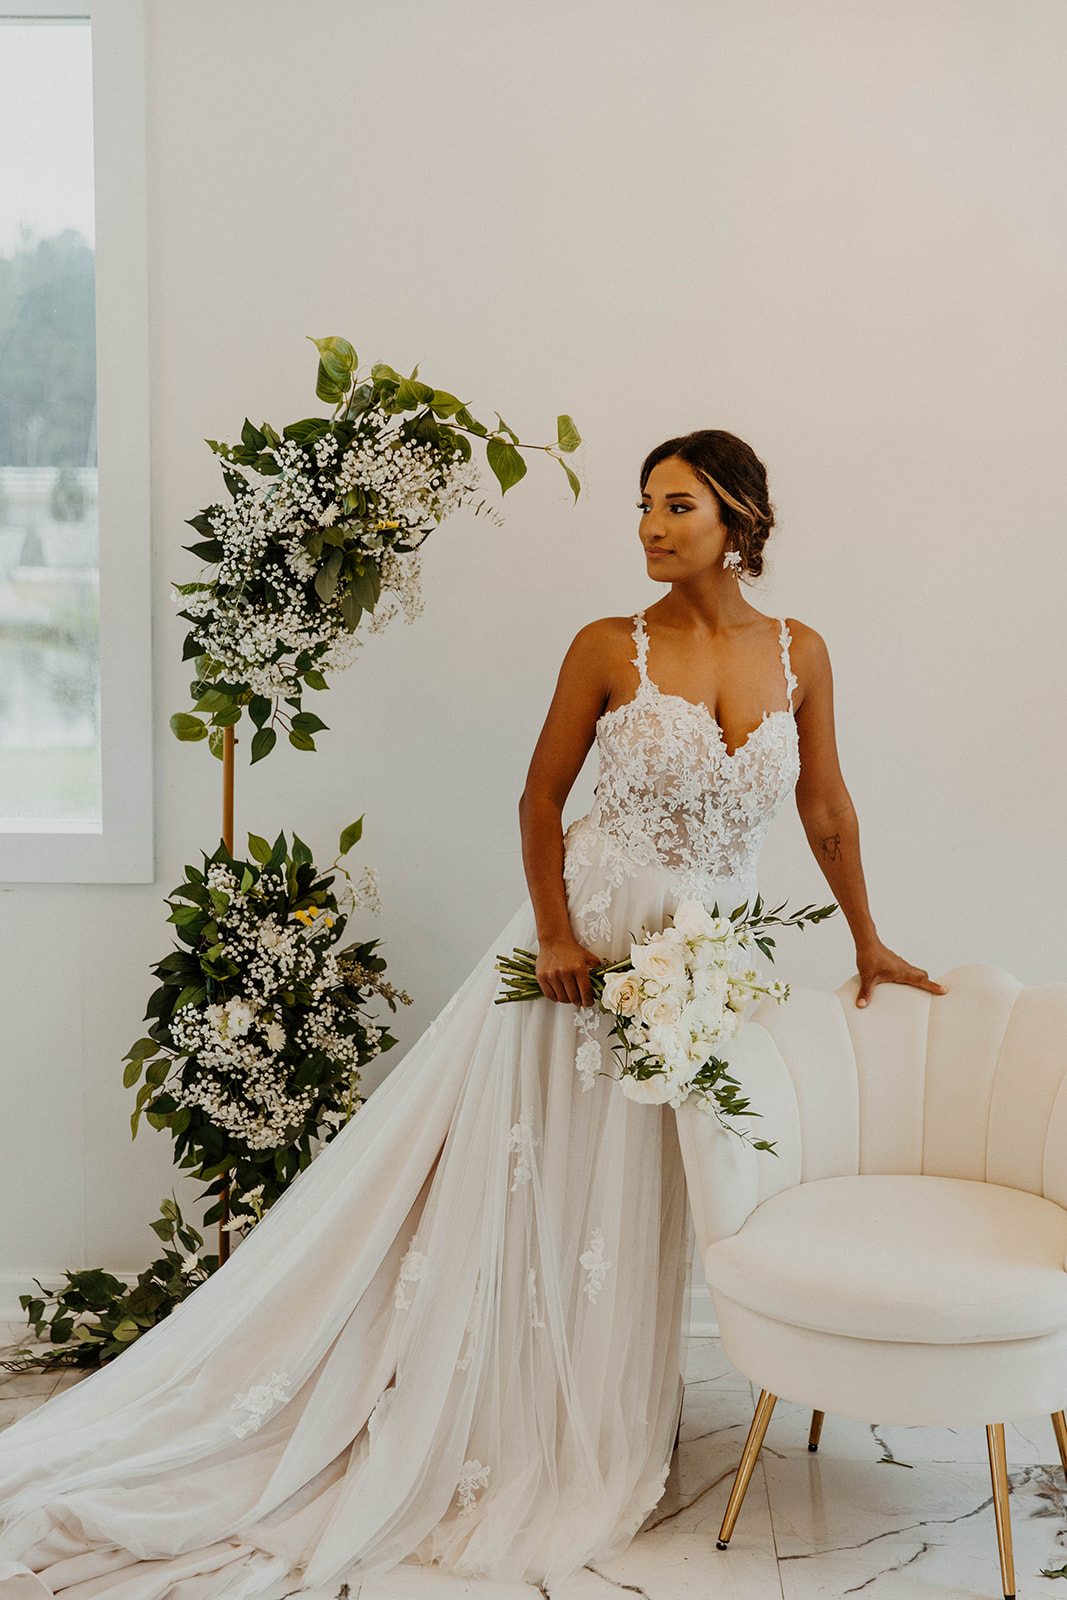 A bride in a lace wedding dress poses with a bouquet beside a floral arrangement and a white sofa in a bright room atChateau 1800